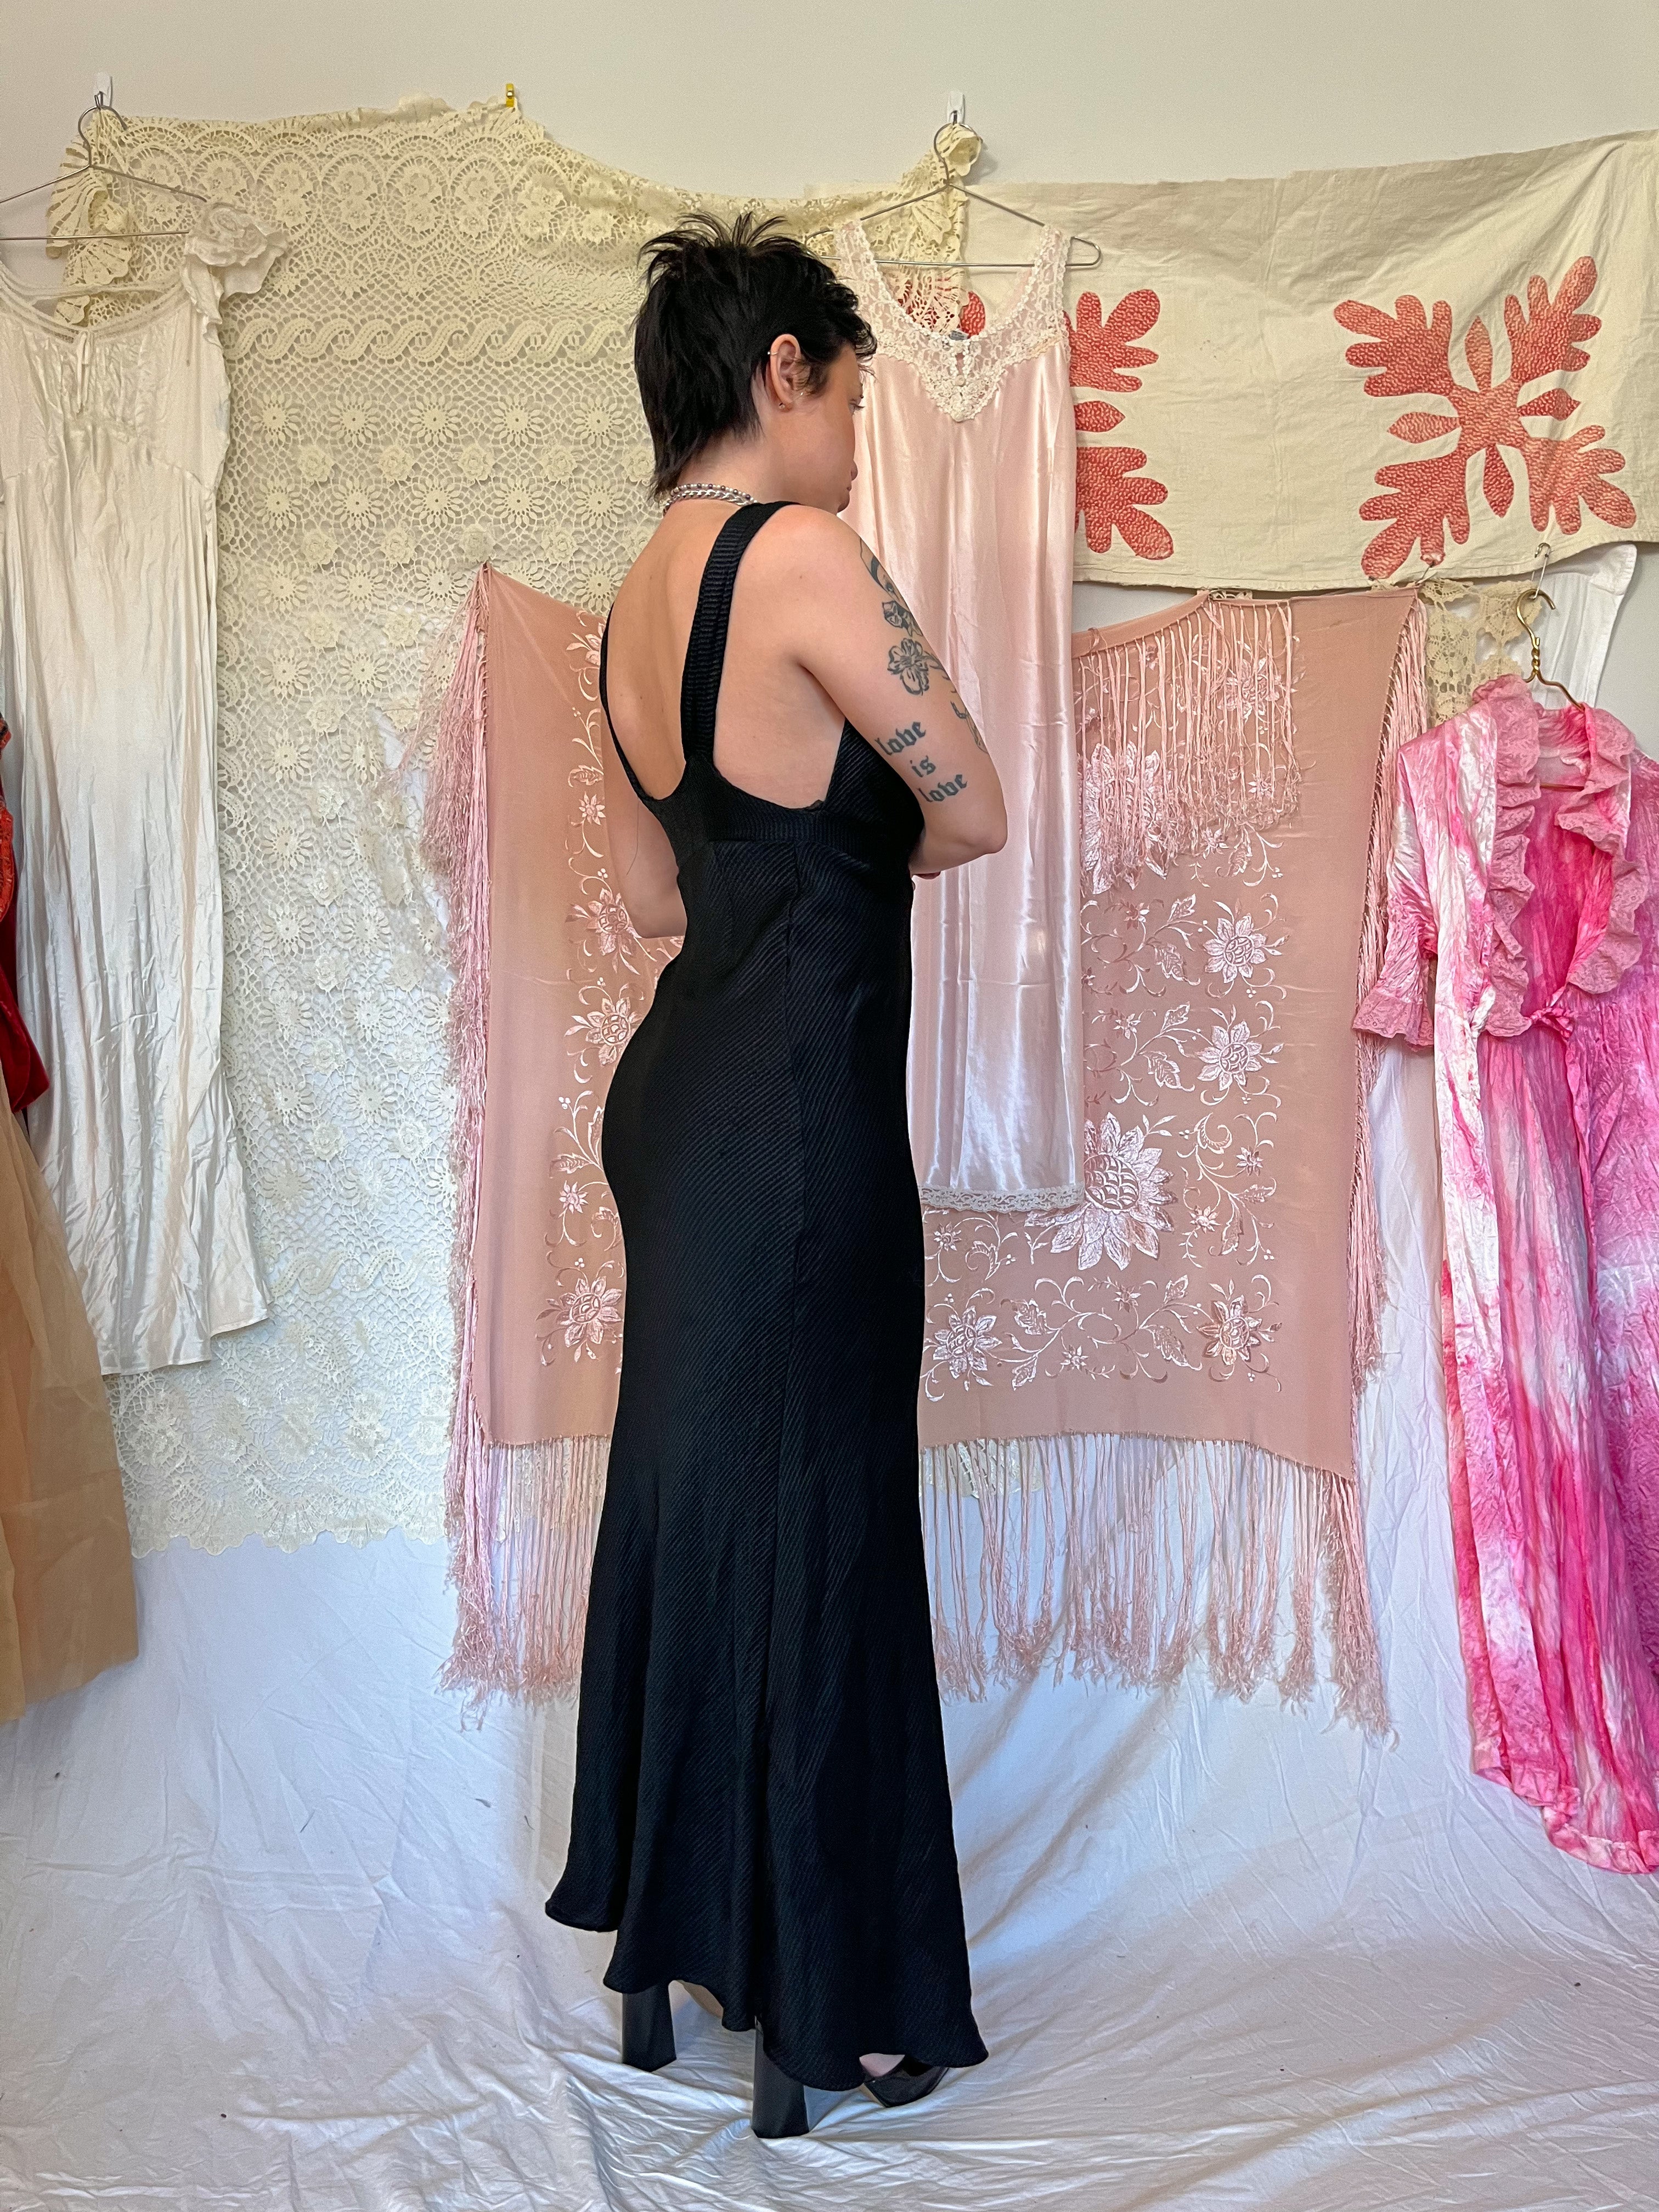 30s Black Bias-Cut Couture-Finish Evening Gown – THE WAY WE WORE